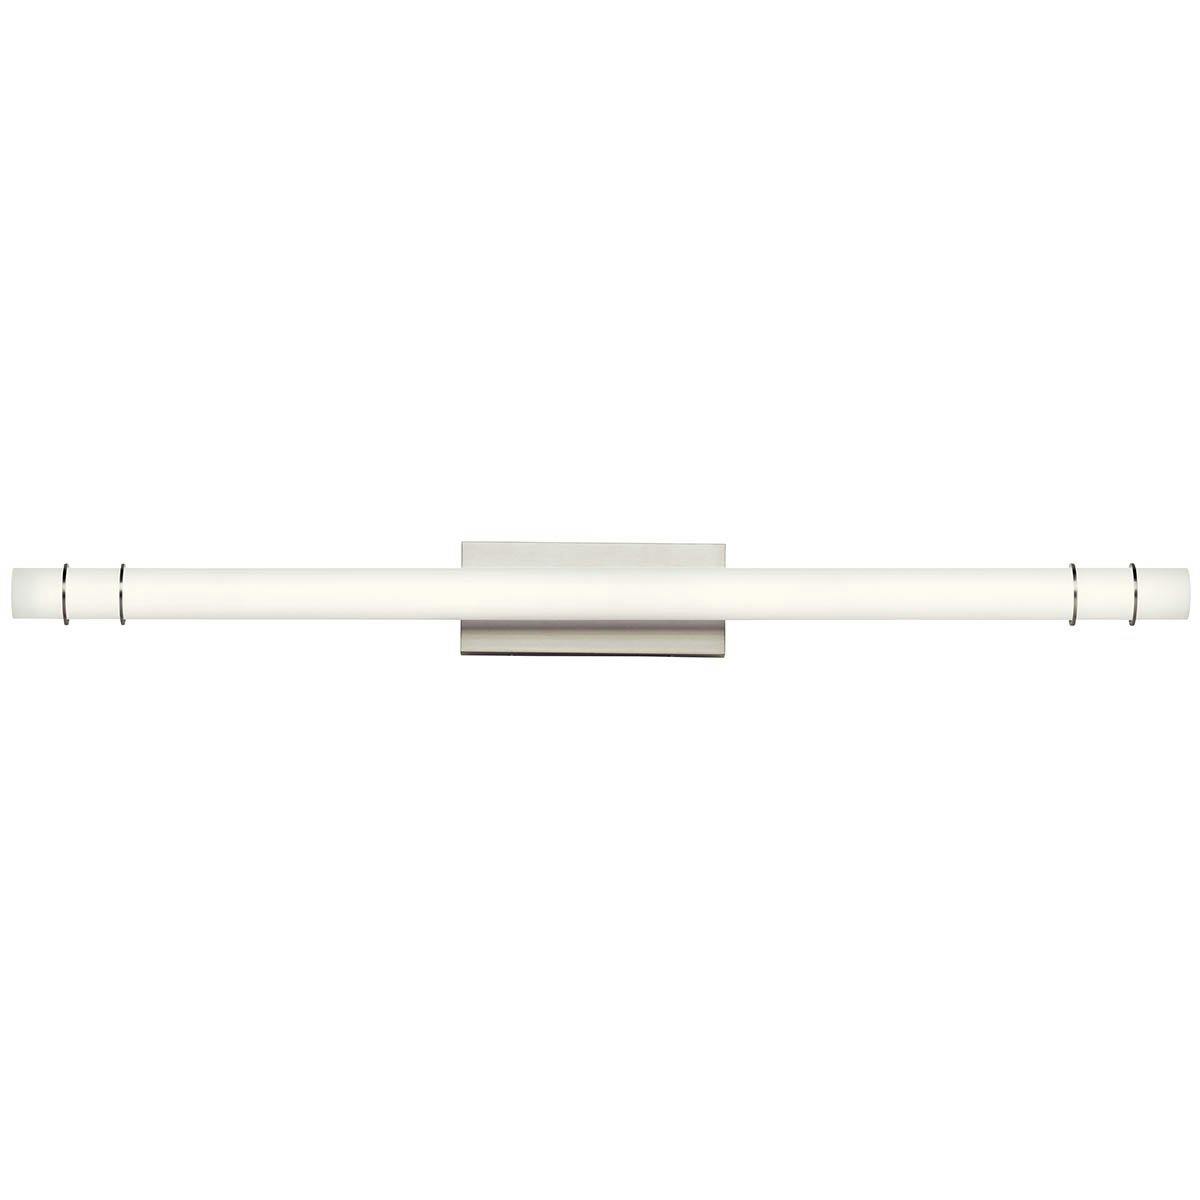 Product image of the 11255NILED shown hung horizontally